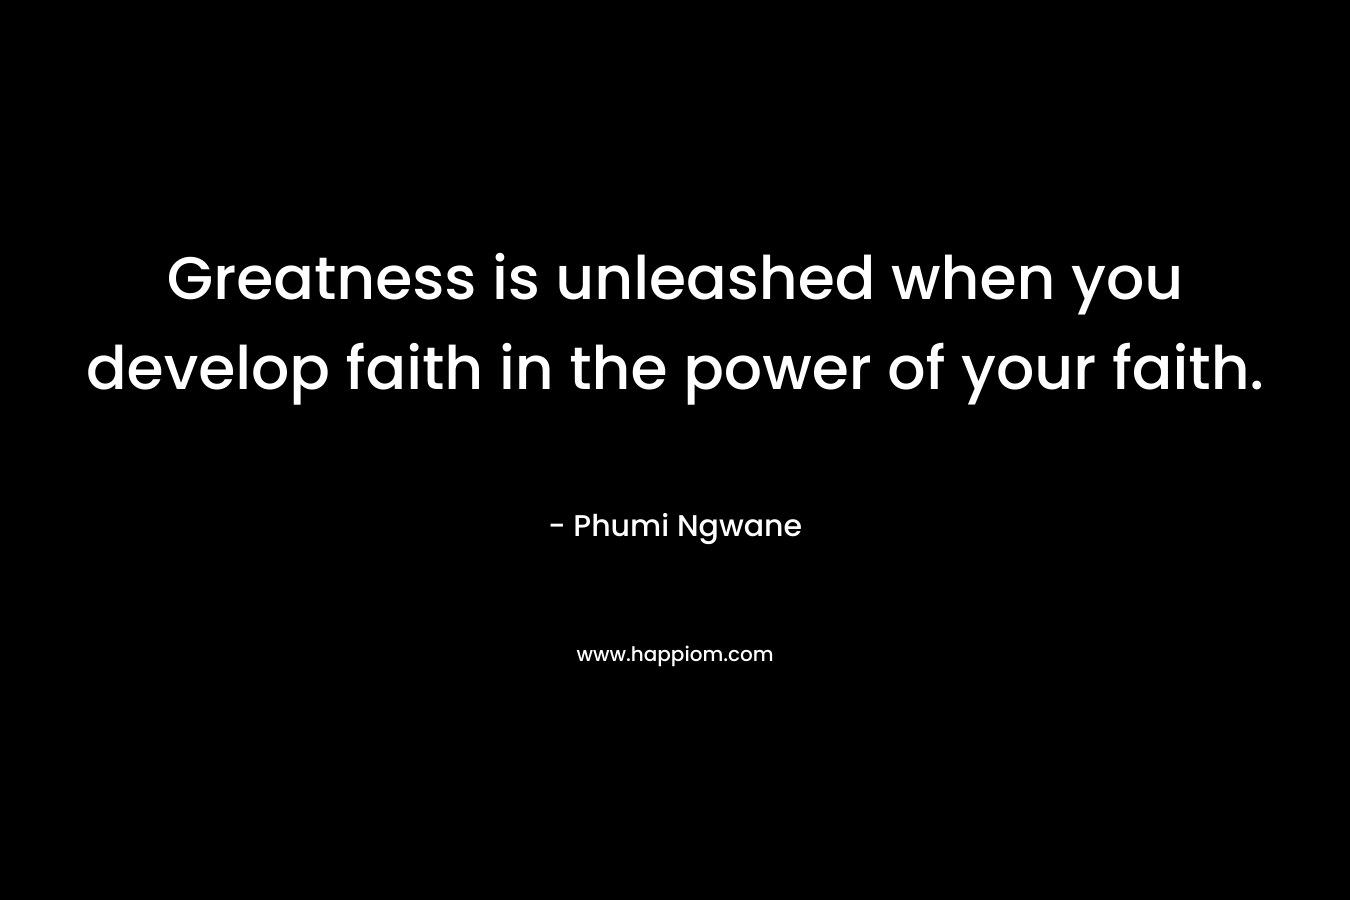 Greatness is unleashed when you develop faith in the power of your faith. – Phumi Ngwane